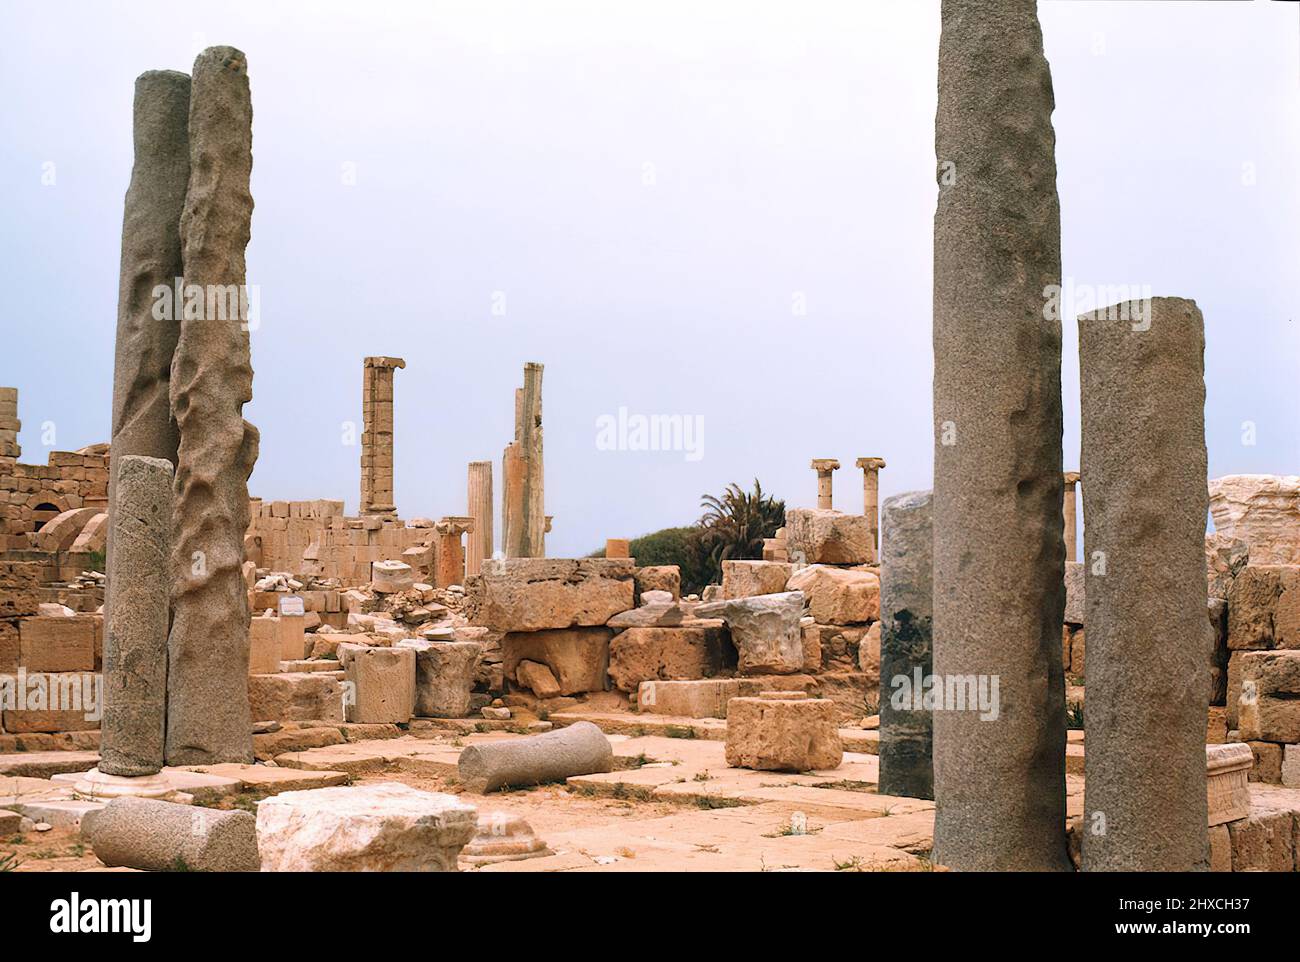 Historical Laptis Magna Romans ruins site in the Libya Stock Photo